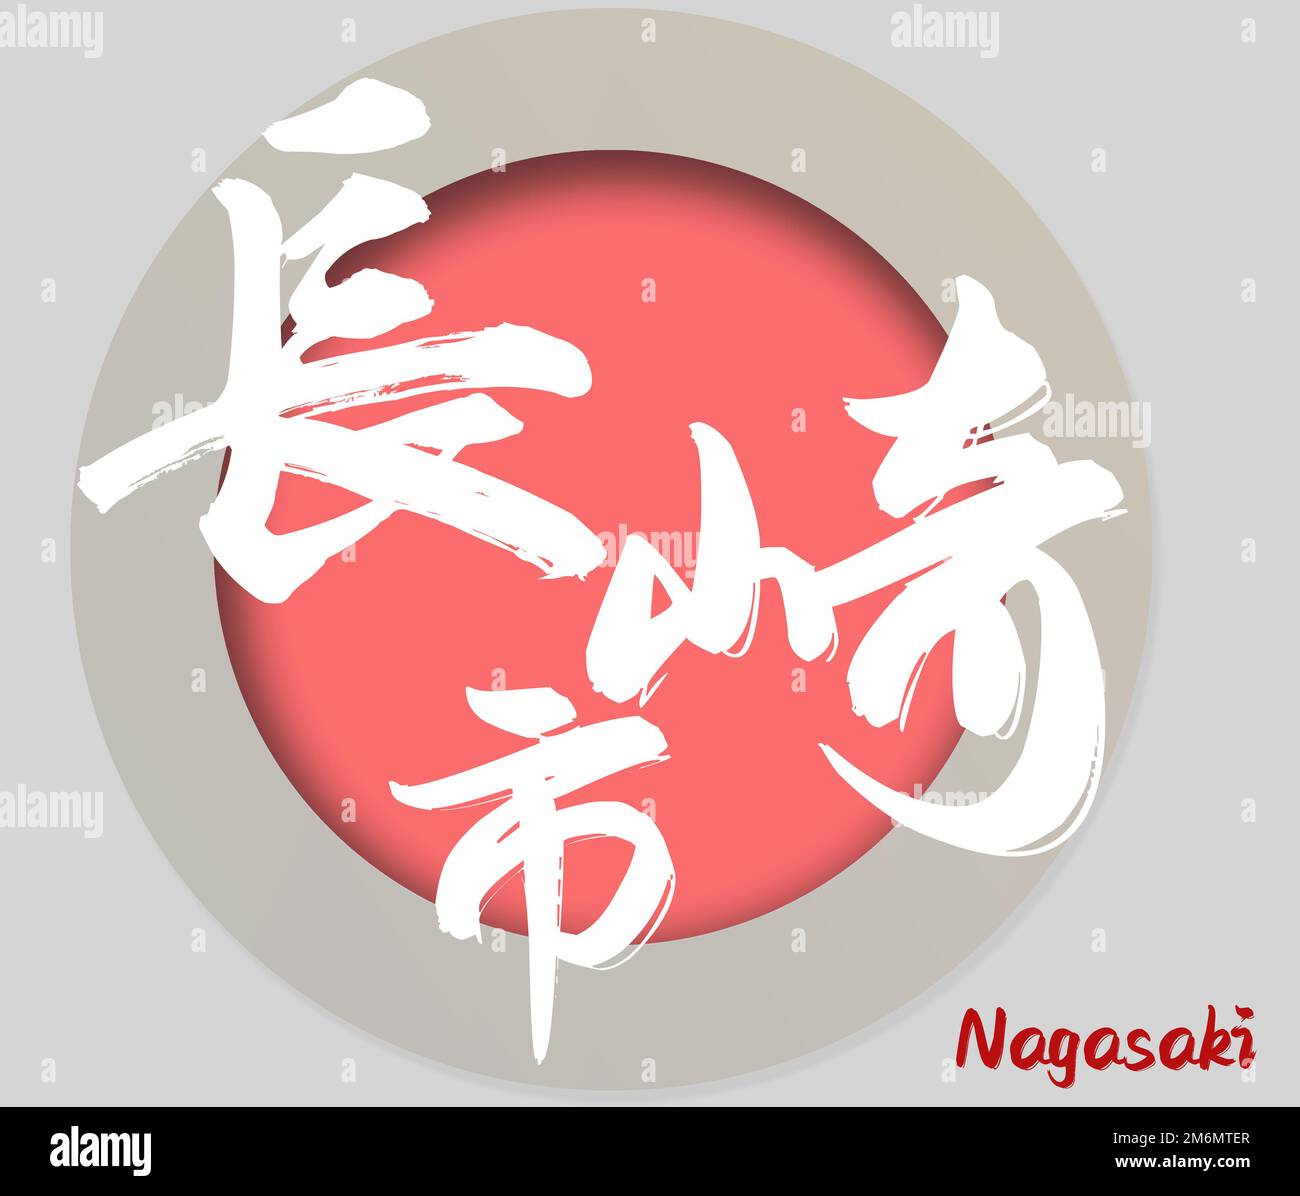 Calligraphy word of Nagasaki city in Japan with white background Stock Photo